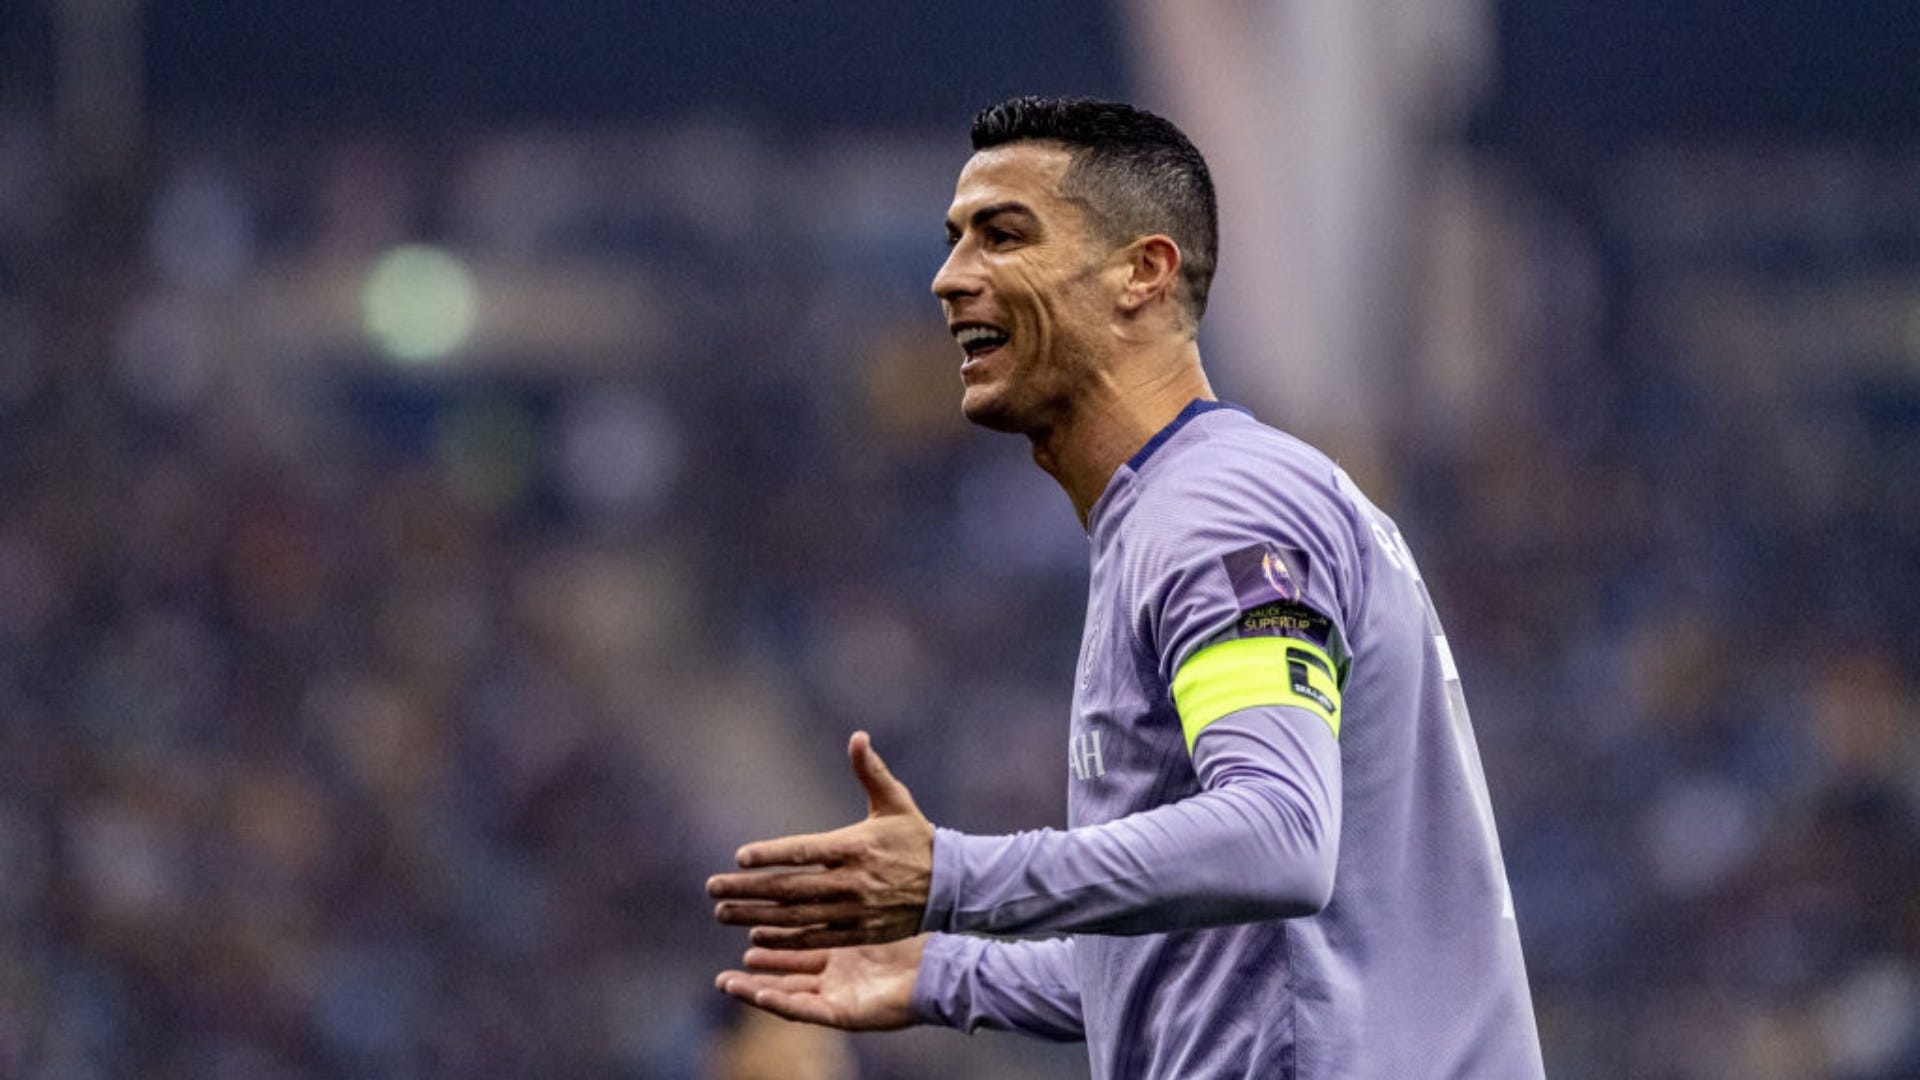 Off the mark! Ronaldo scores stoppage-time penalty to rescue draw for Al-Nassr against Al-Fateh